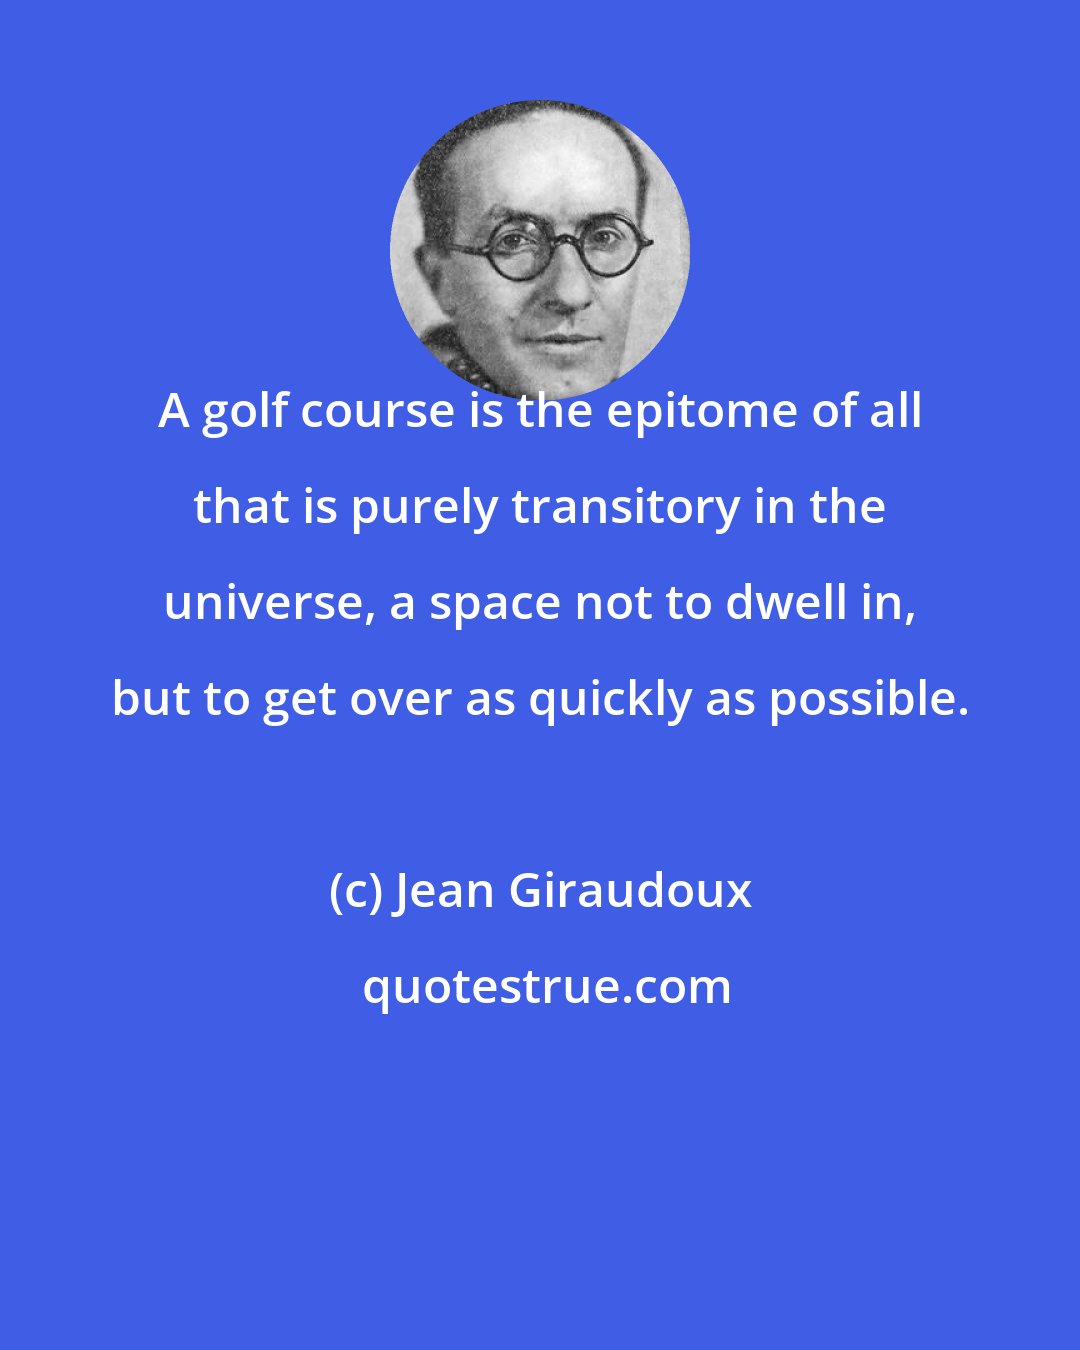 Jean Giraudoux: A golf course is the epitome of all that is purely transitory in the universe, a space not to dwell in, but to get over as quickly as possible.